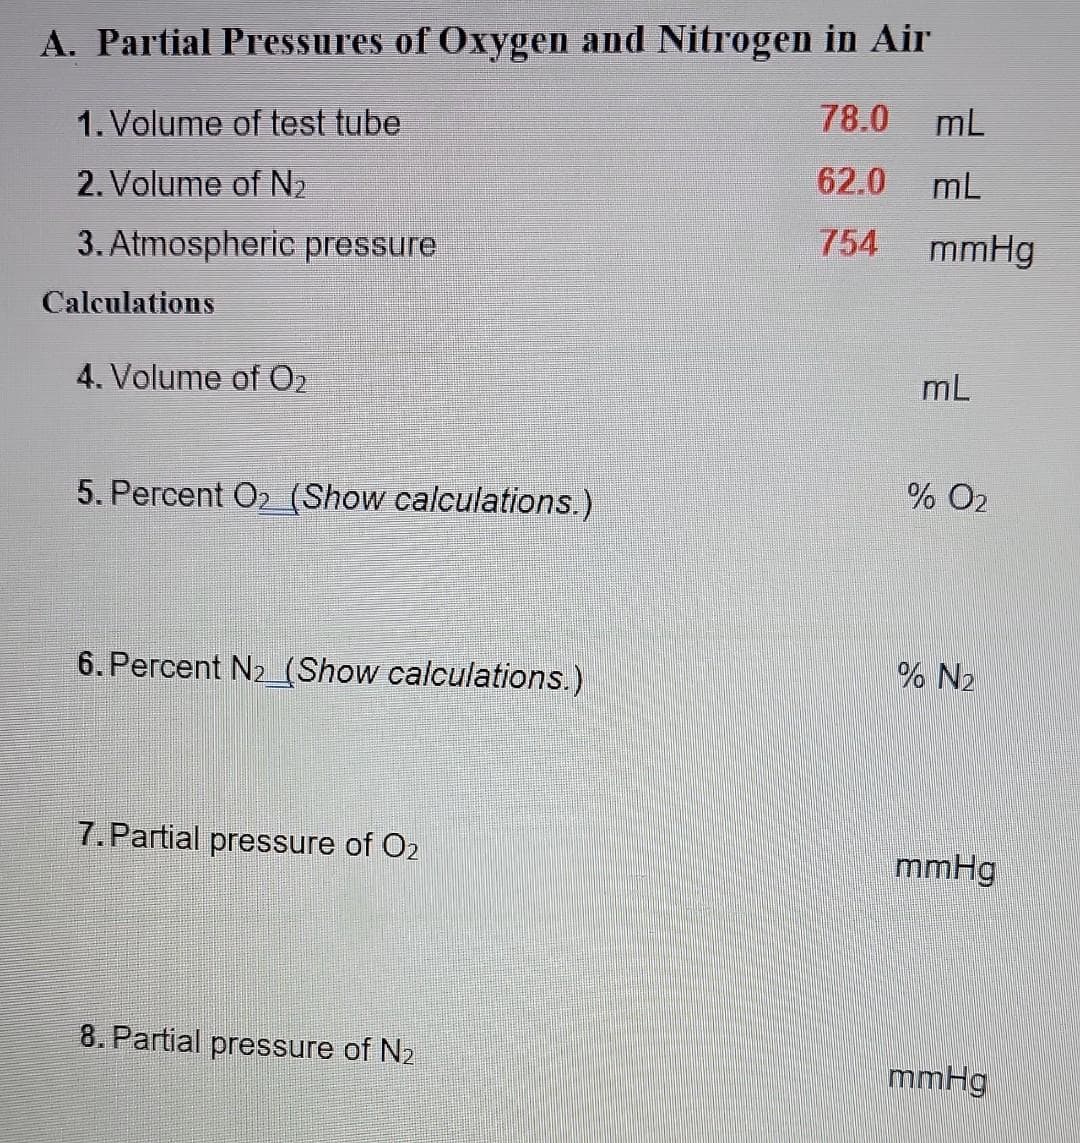 A. Partial Pressures of Oxygen and Nitrogen in Air
78.0
1. Volume of test tube
2. Volume of N₂
62.0
3. Atmospheric pressure
754
Calculations
4. Volume of O₂
5. Percent O2_(Show calculations.)
6. Percent N₂_(Show calculations.)
7. Partial pressure of O2
8. Partial pressure of N₂
mL
mL
mmHg
mL
% O2
% N₂
mmHg
mmHg